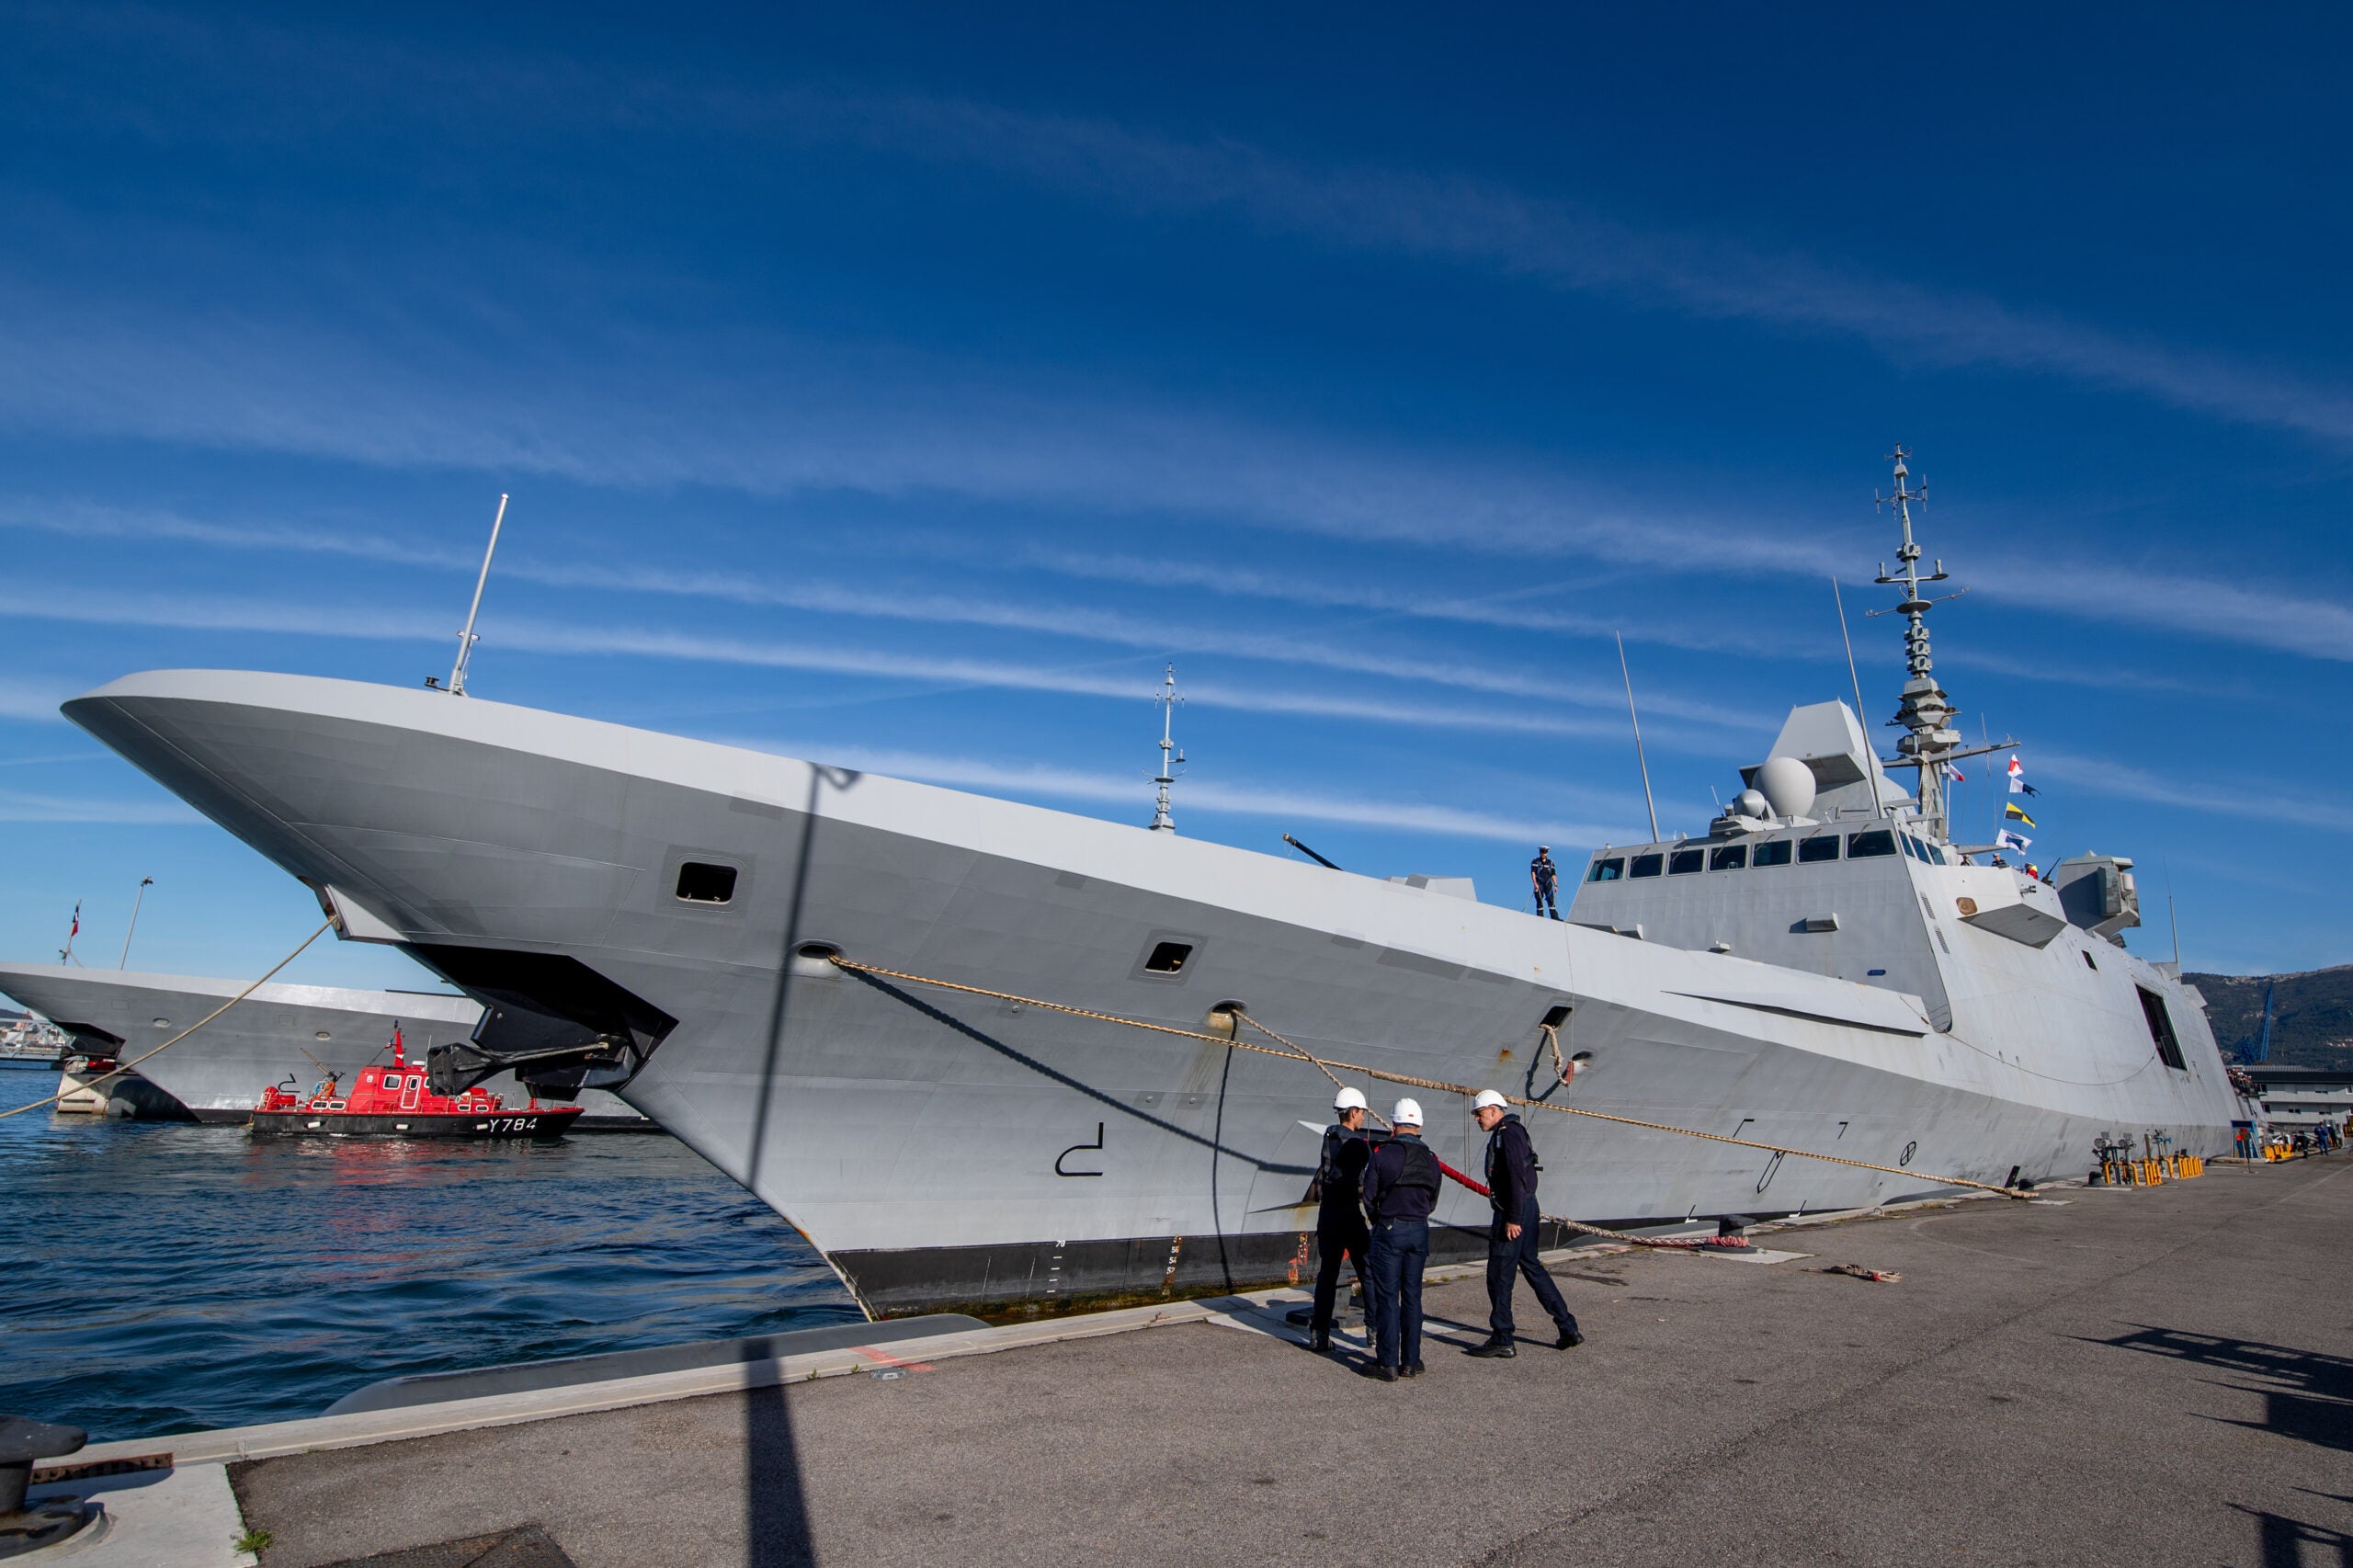 TOULON, FRANCE - 2024/04/04: Sailors take part in the docking of the FREMM-DA (frégate multi-missions à capacité de défense aerienne renforcée) Alsace in Toulon. The French frigate Alsace returned to her home port of Toulon after a three-month mission in the Red Sea and Indian Ocean to defend merchant ships against attacks by Houti rebels. (Photo by Laurent Coust/SOPA Images/LightRocket via Getty Images)